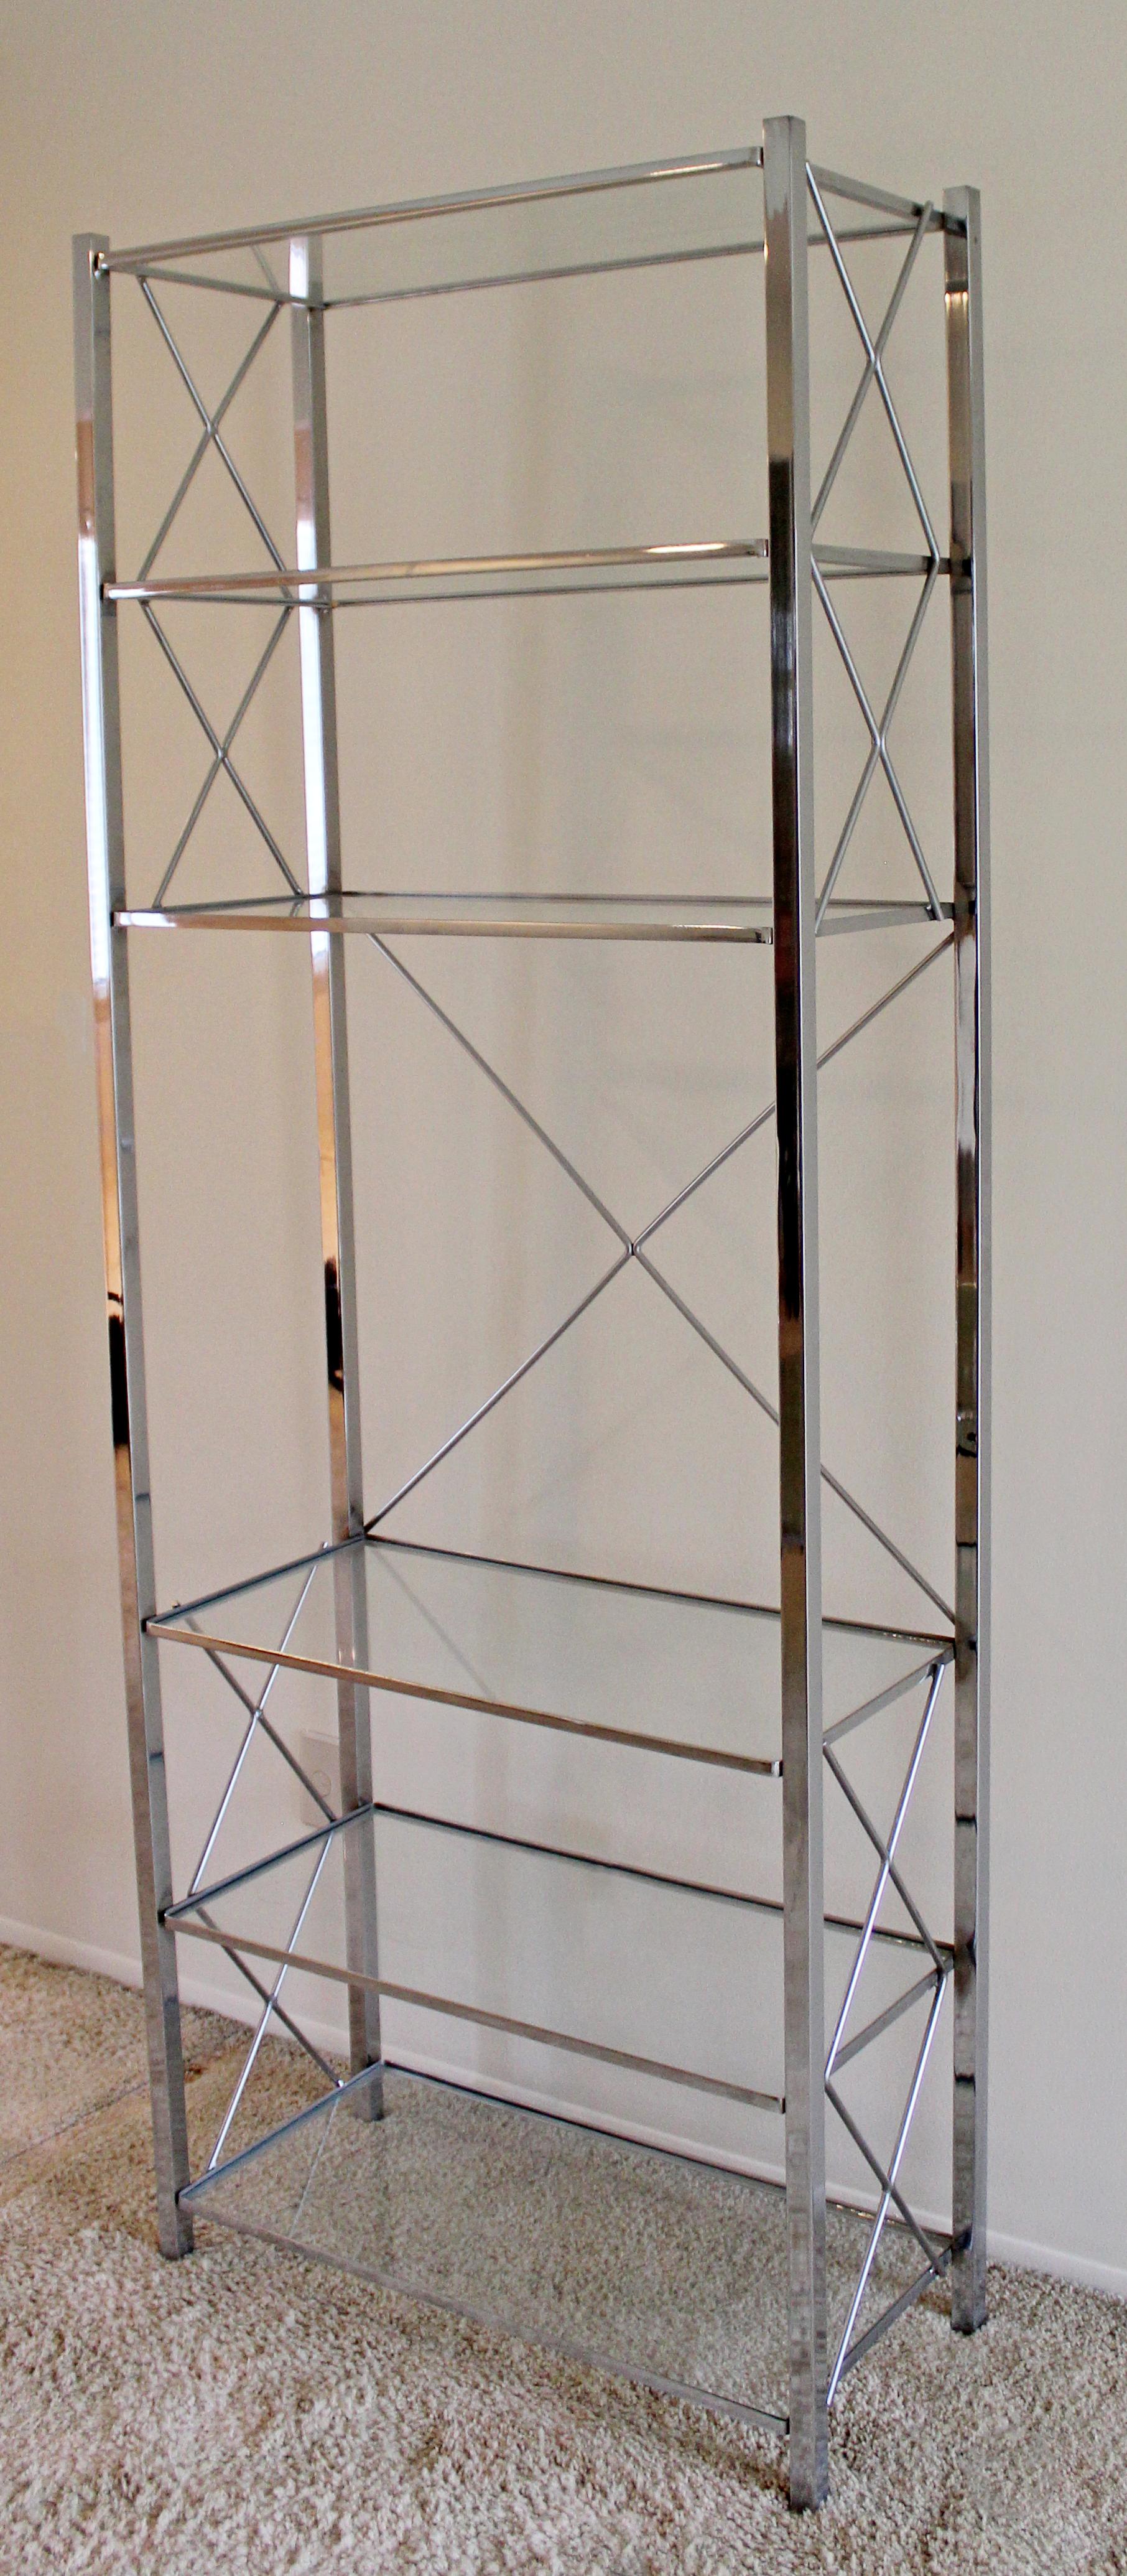 For your consideration is a gorgeous, tall étagère, made of chrome and with six glass shelves, by Milo Baughman, circa the 1970s. In very good vintage condition. The dimensions are 30.5